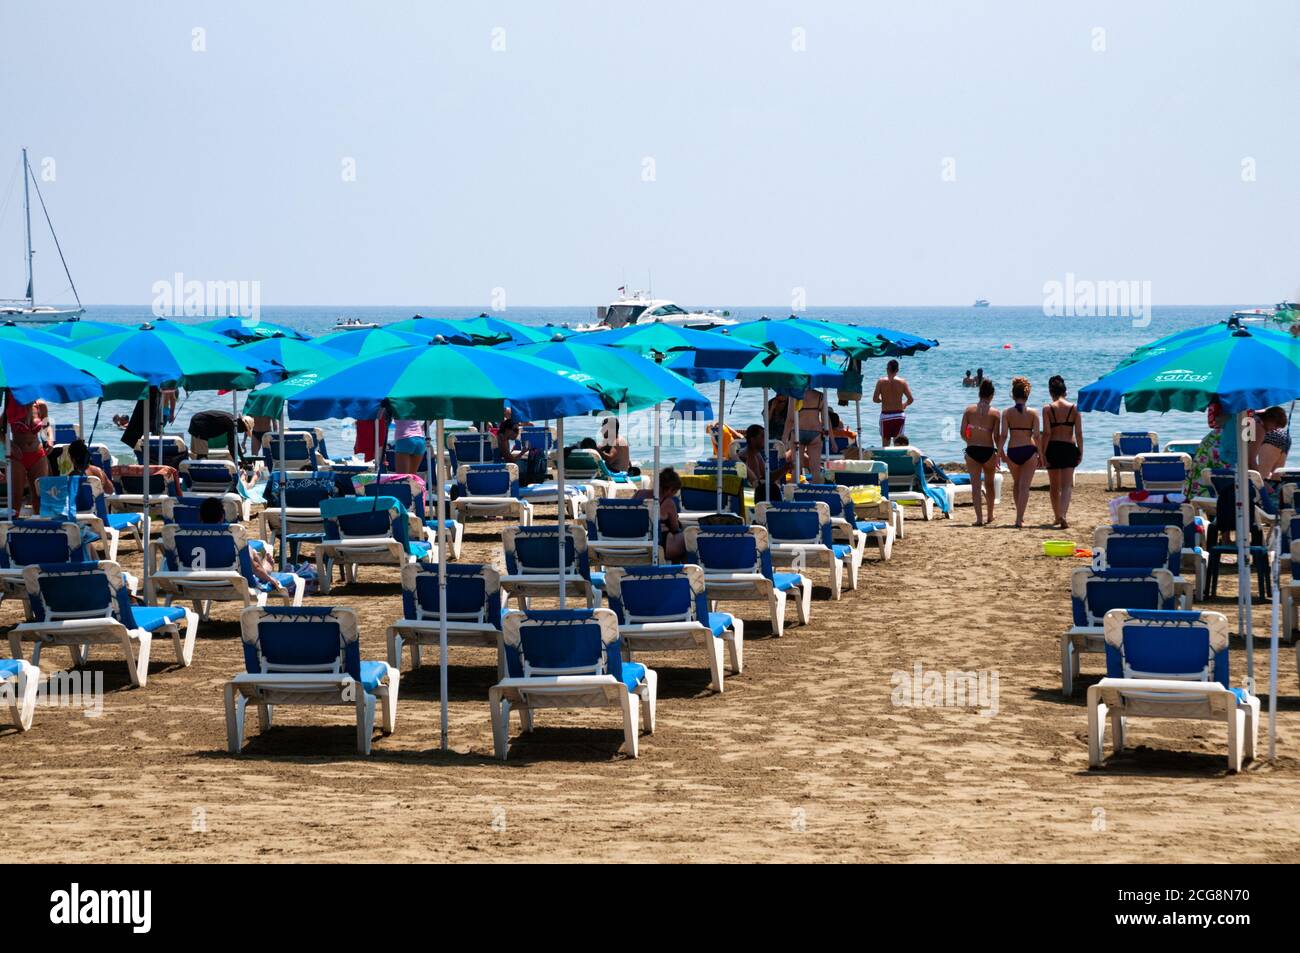 Row upon row of sunbeds and parasols on a hot summer's day on the beach in Larnaca, Cyprus. Stock Photo